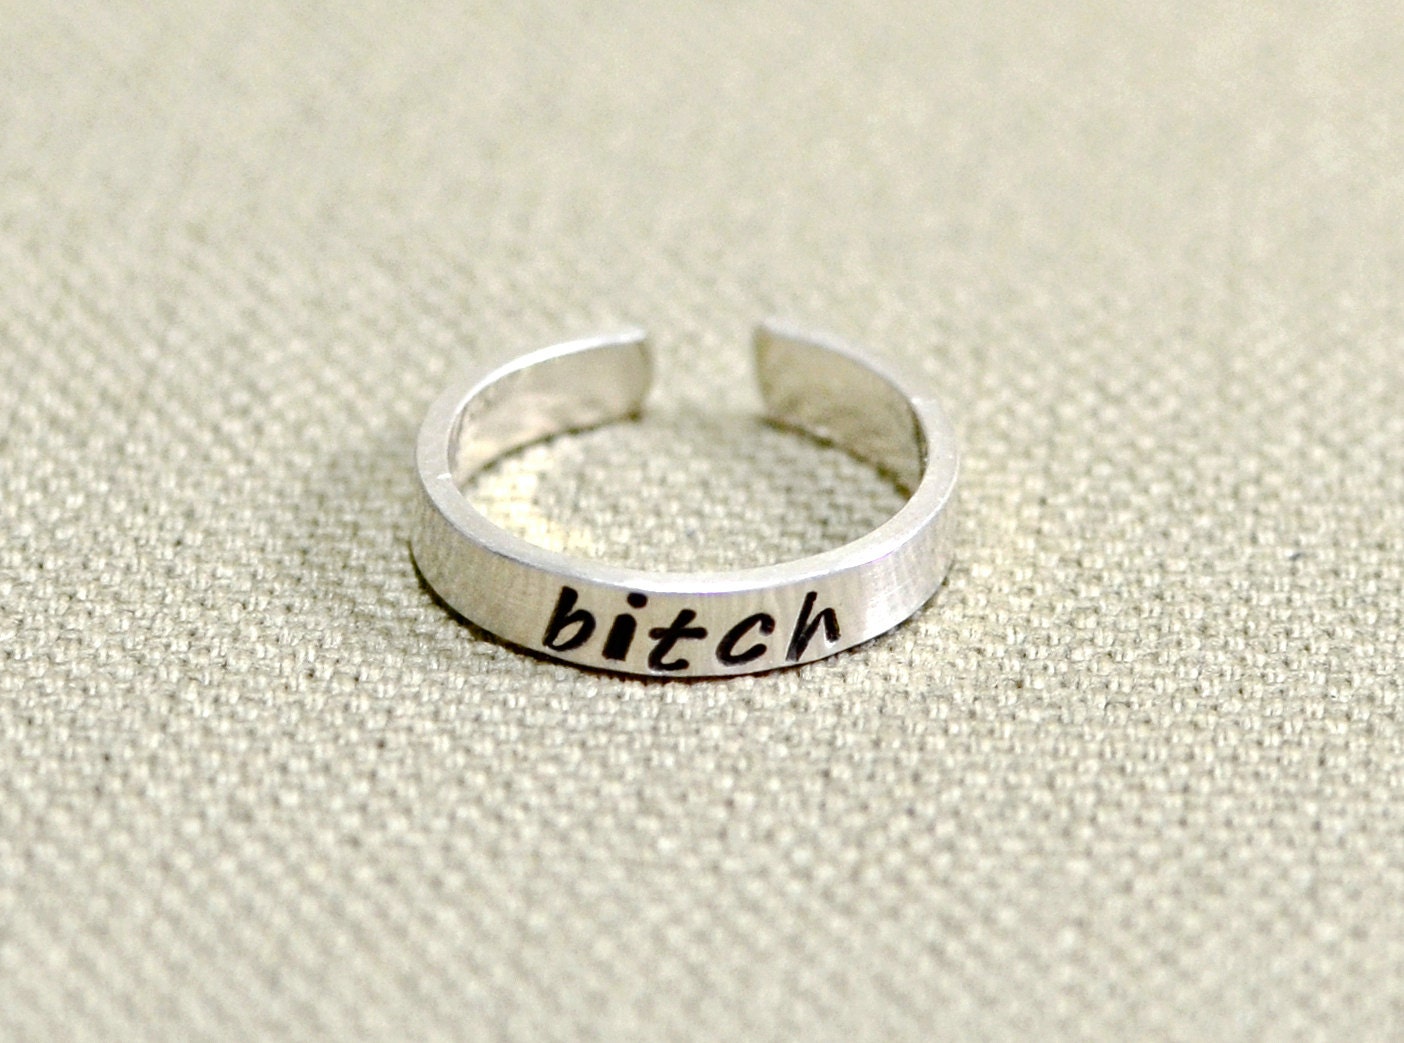 Sterling Silver B*tch Toe Ring